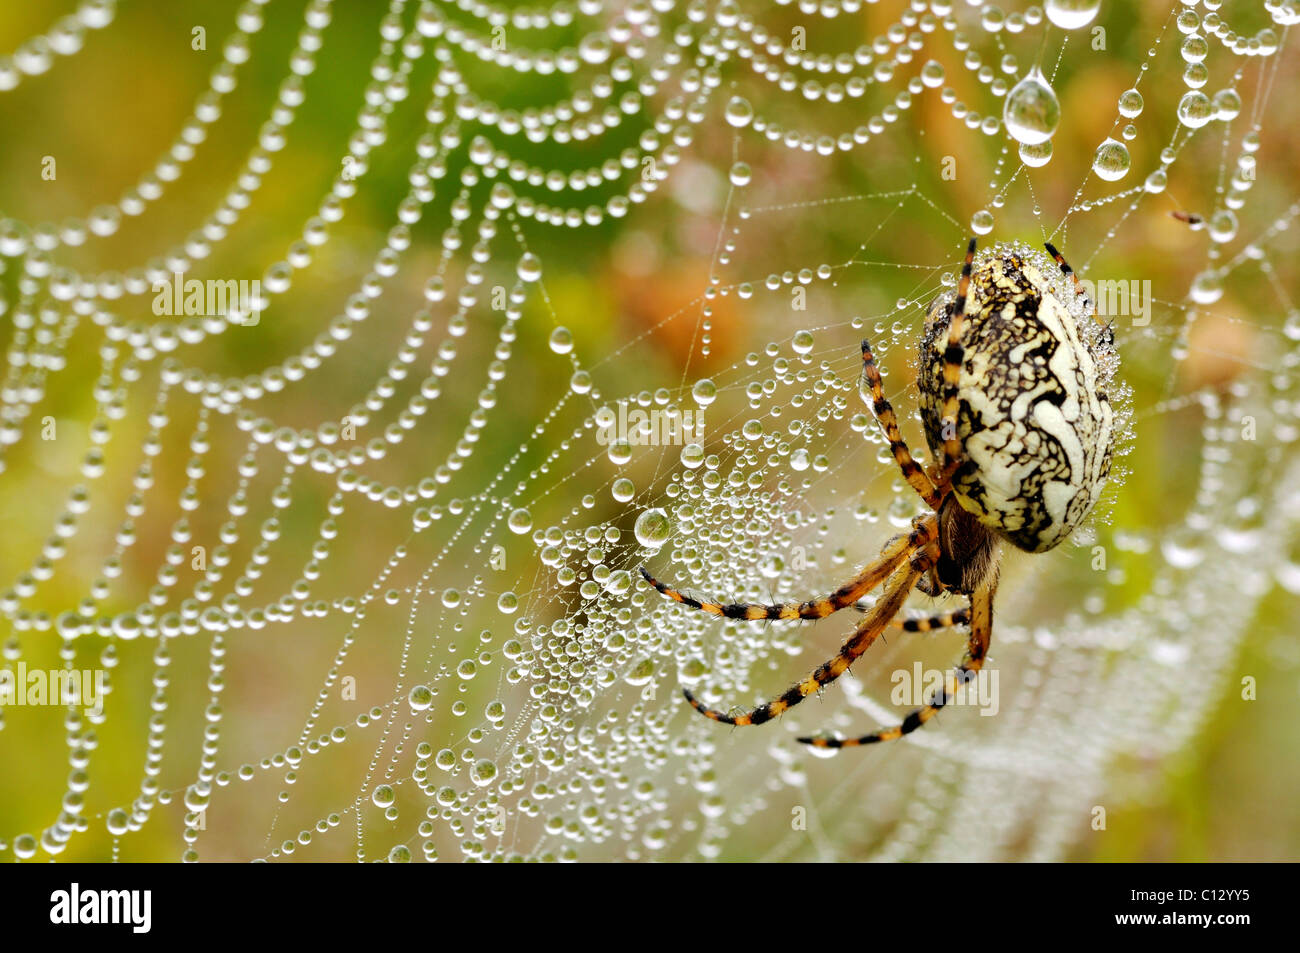 close-up of oak spider Stock Photo